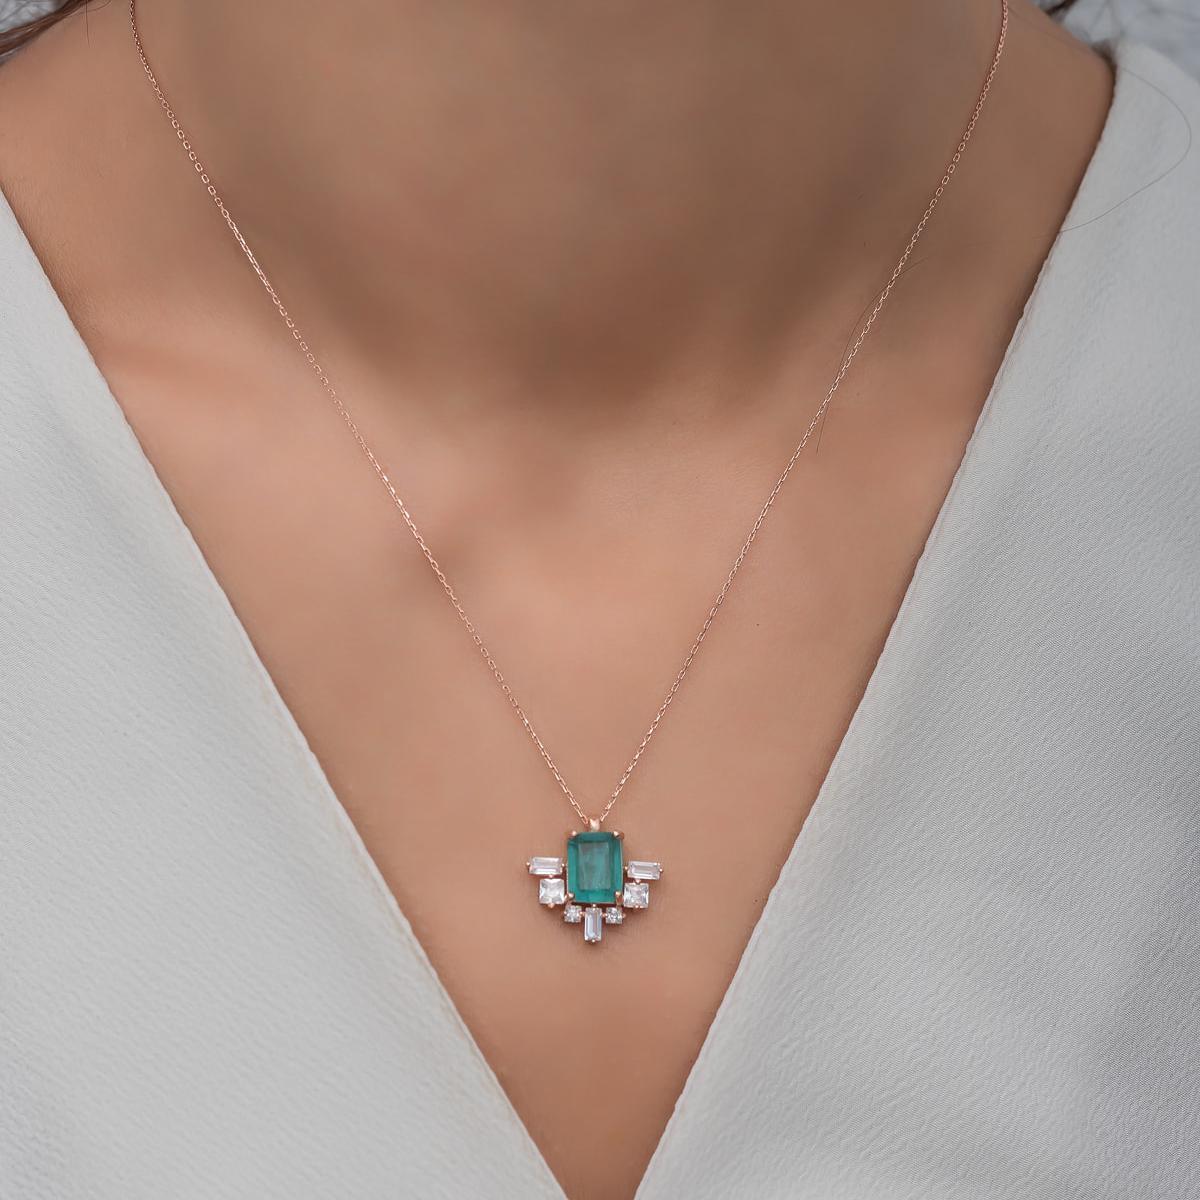 Green Birthstone Necklace • Green Baugette Necklace • Zircon Necklace - Trending Silver Gifts